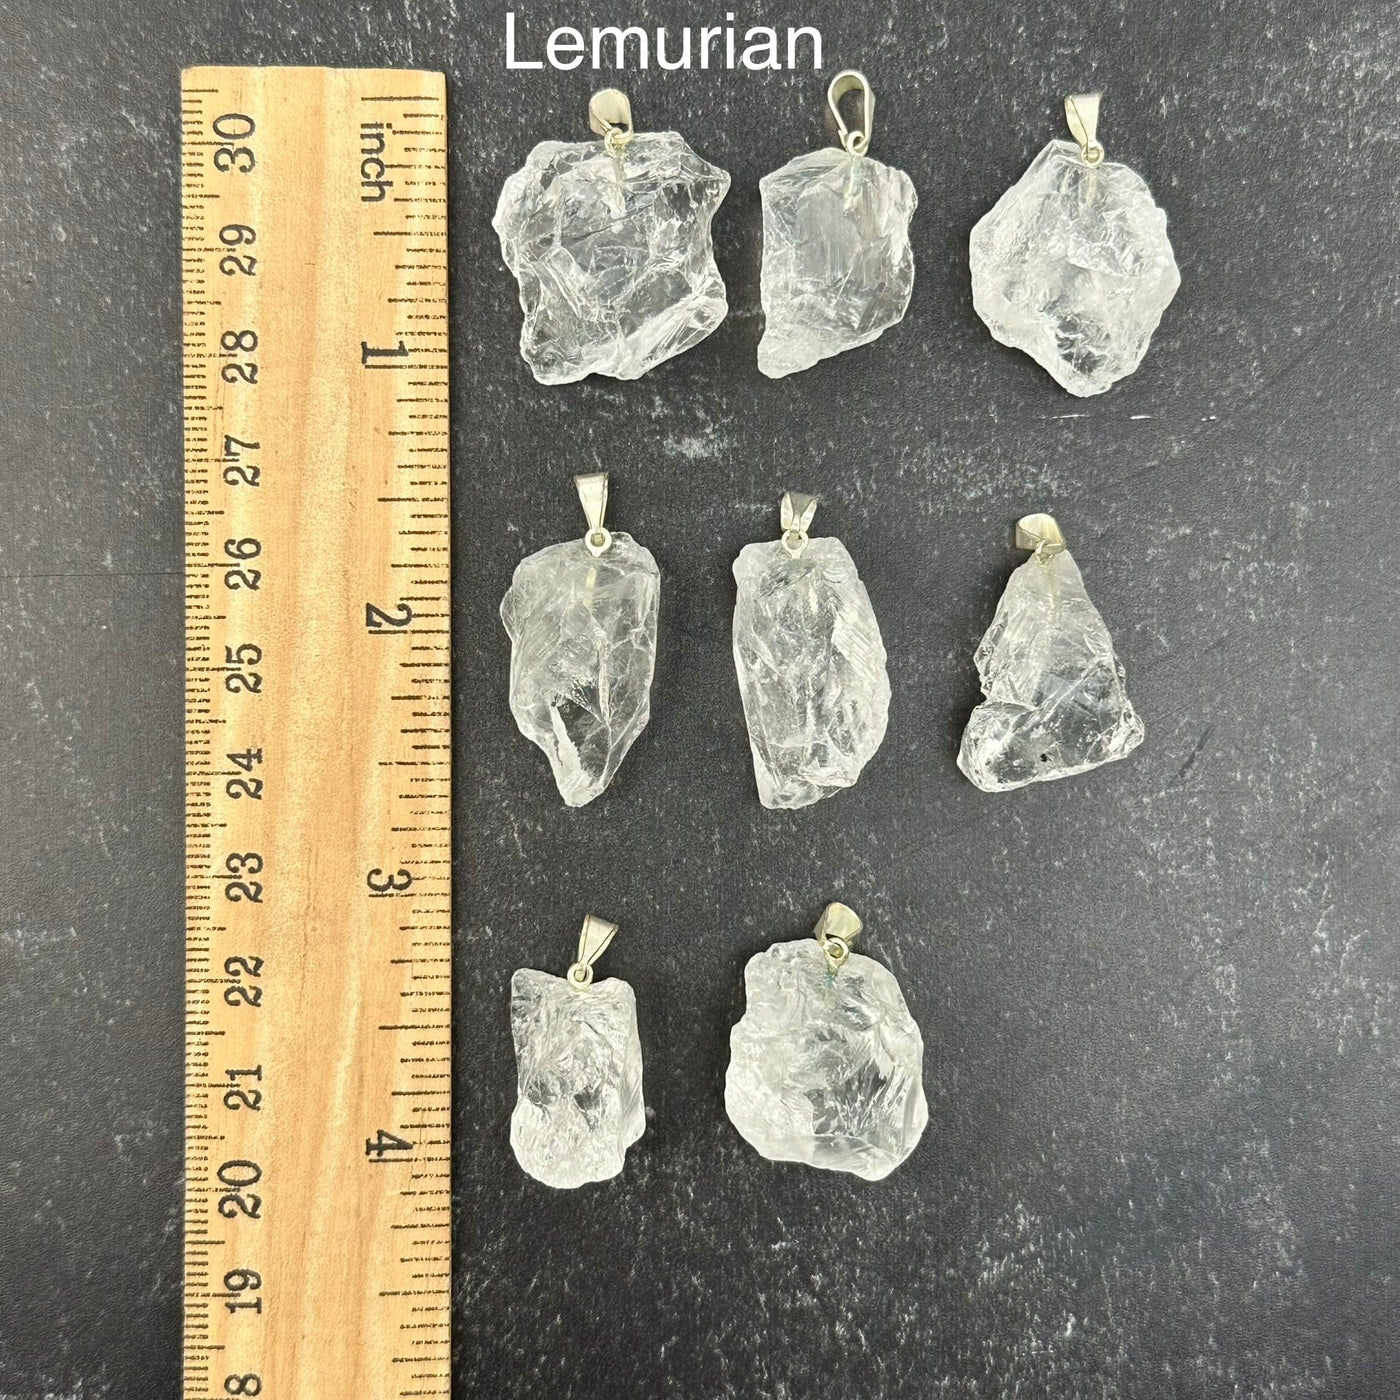 lemurian pendants next to a ruler for size reference 